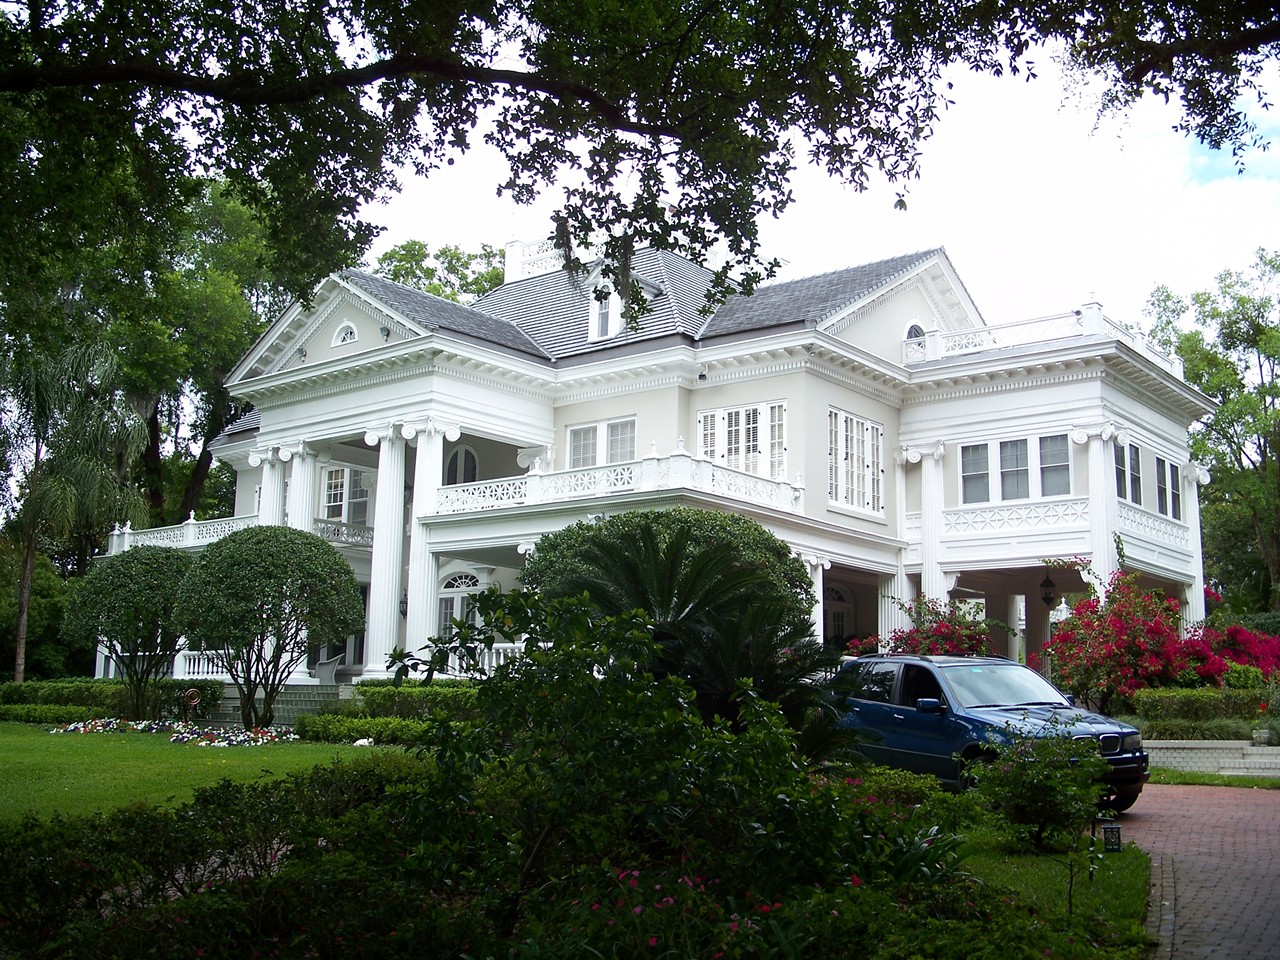 The Comstock-Harris house, located at 724 Bonita Drive, is one of the oldest Winter Park homes. It is also one of two houses in Winter Park listed on the National Register of Historic Places.
Photo via Wikipedia